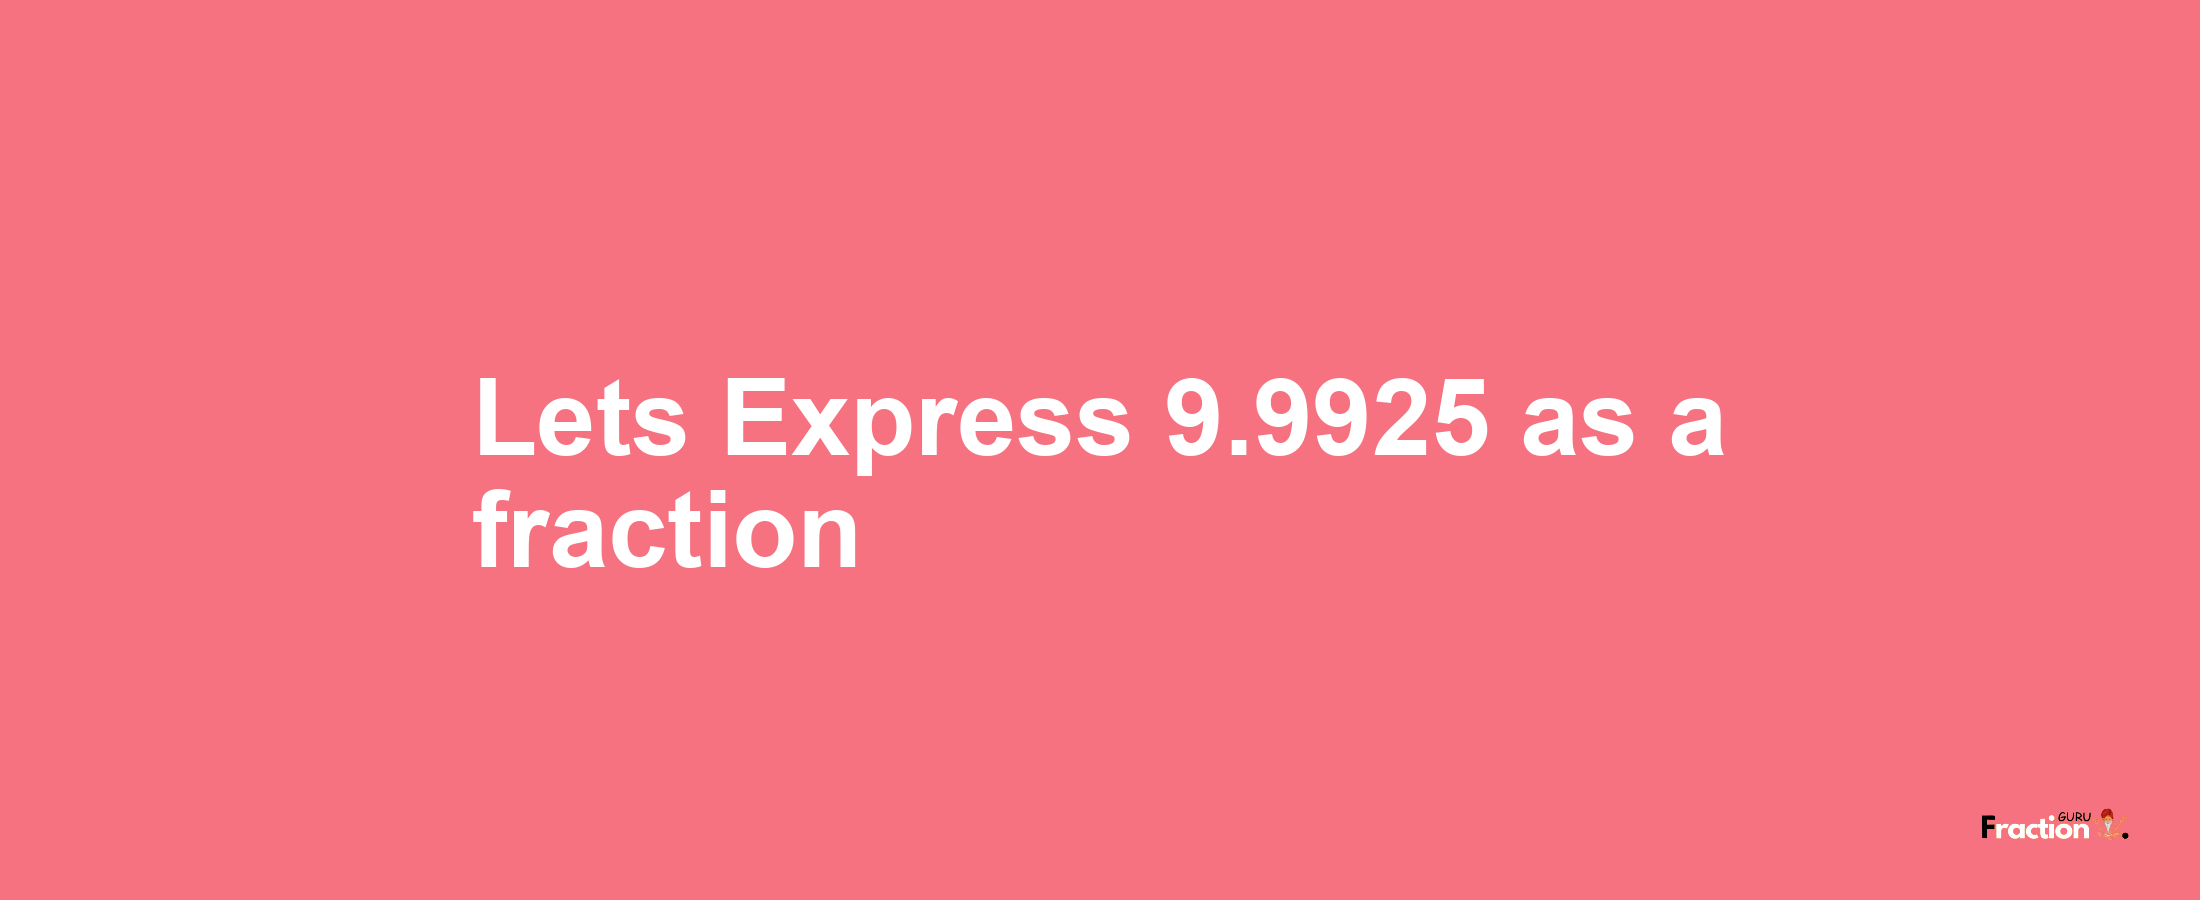 Lets Express 9.9925 as afraction